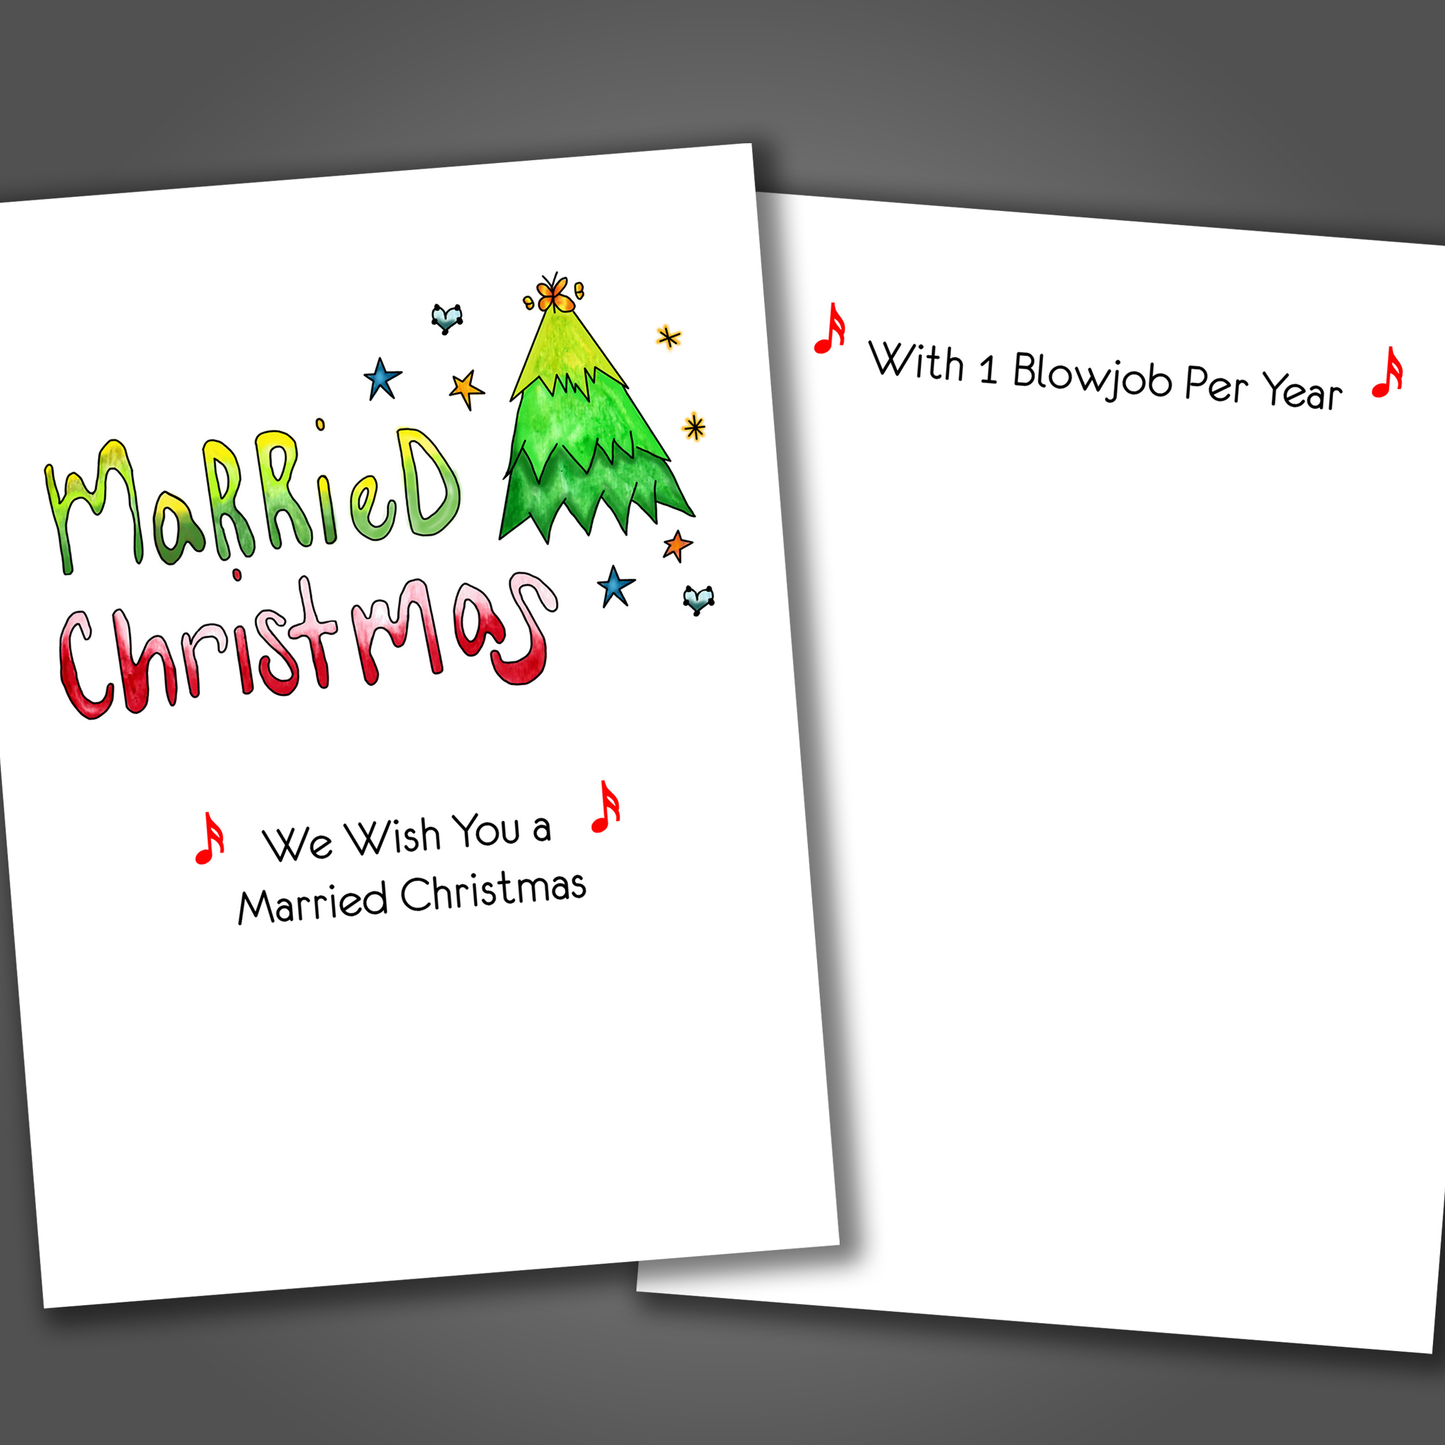 Funny Christmas card wishing a "married Christmas" on the front of the card. Inside the card is a funny joke that ends "with 1 blowjob per year."